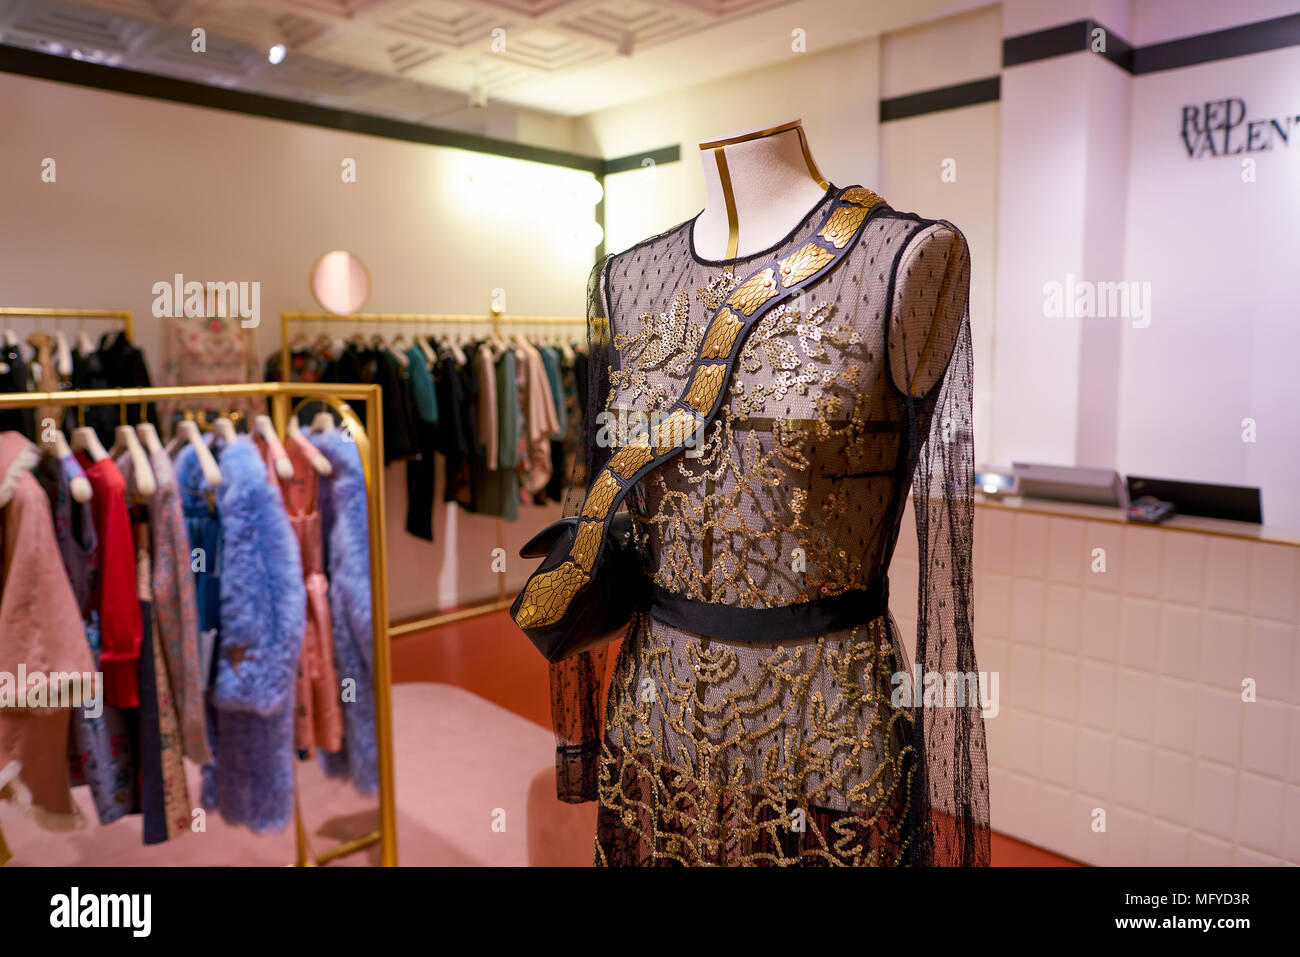 ROME, ITALY - CIRCA NOVEMBER, 2017: Red Valentino clothing on display at a  second flagship store of Rinascente in Rome Stock Photo - Alamy